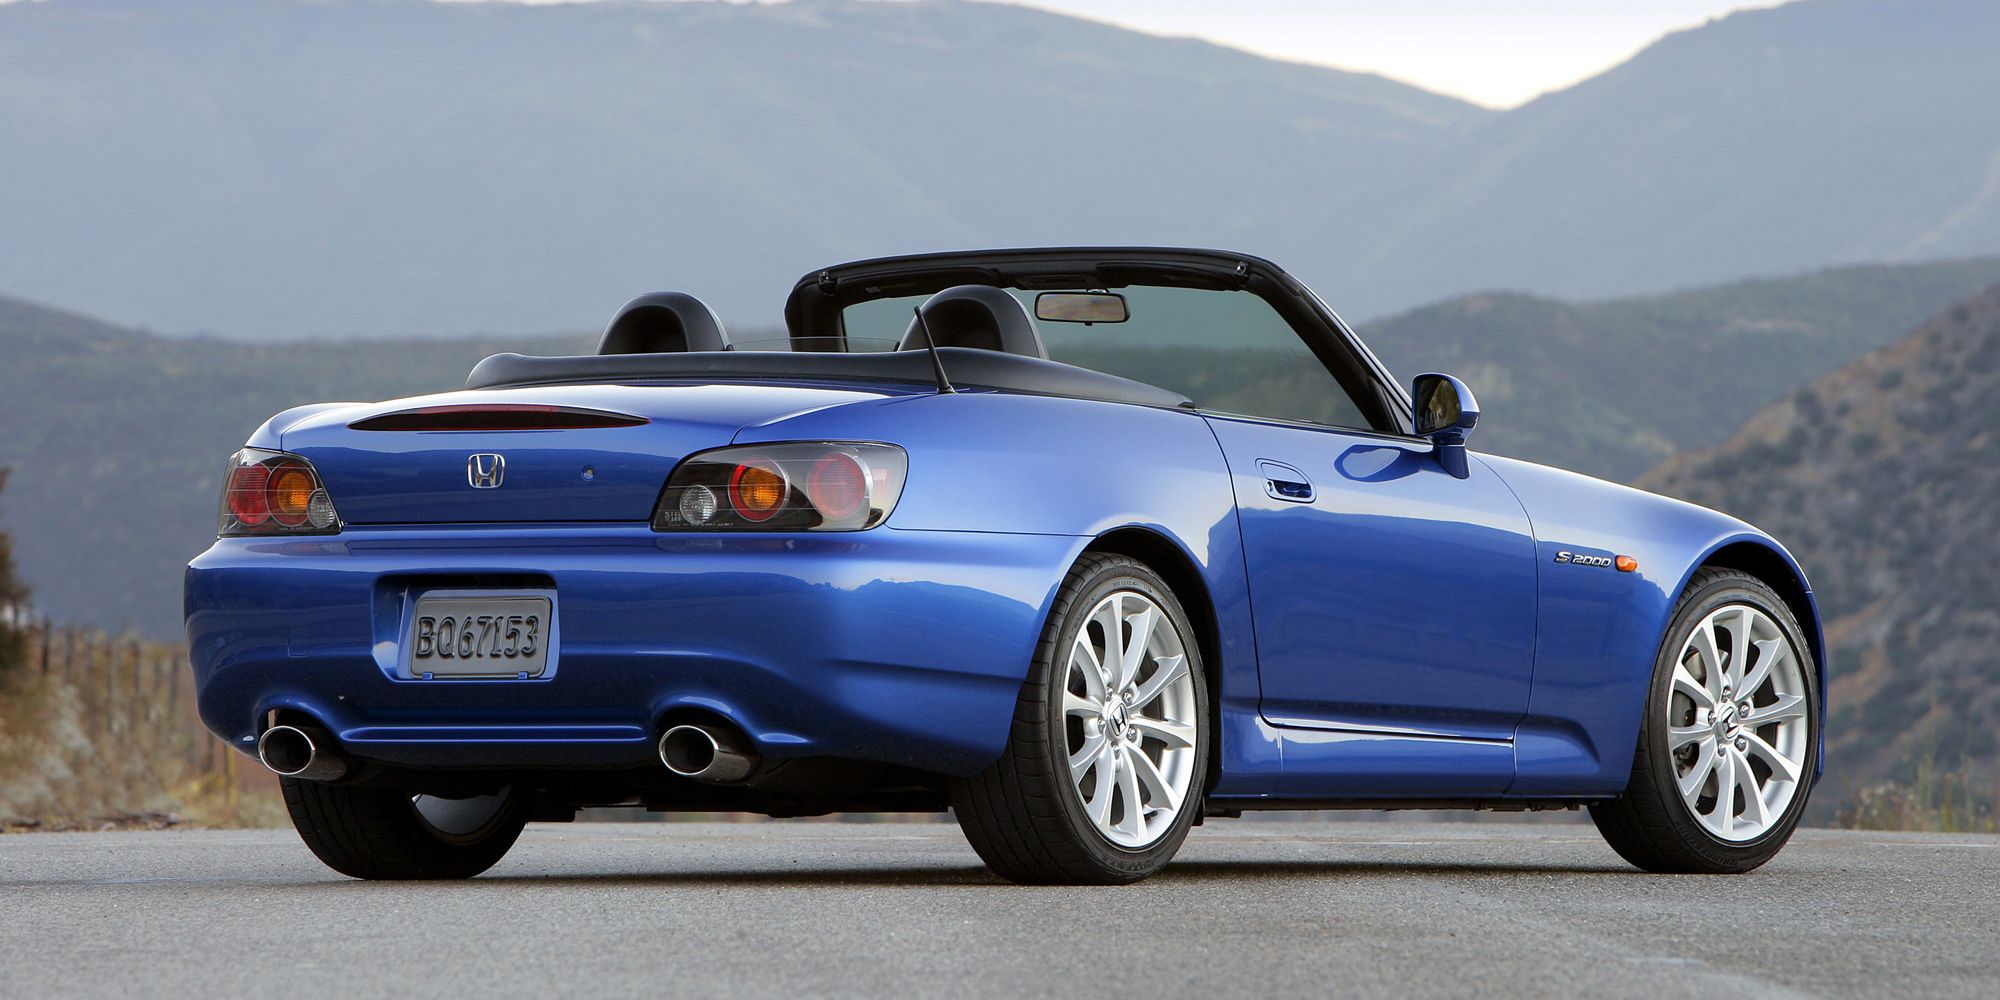 The rear of the S2000 in blue